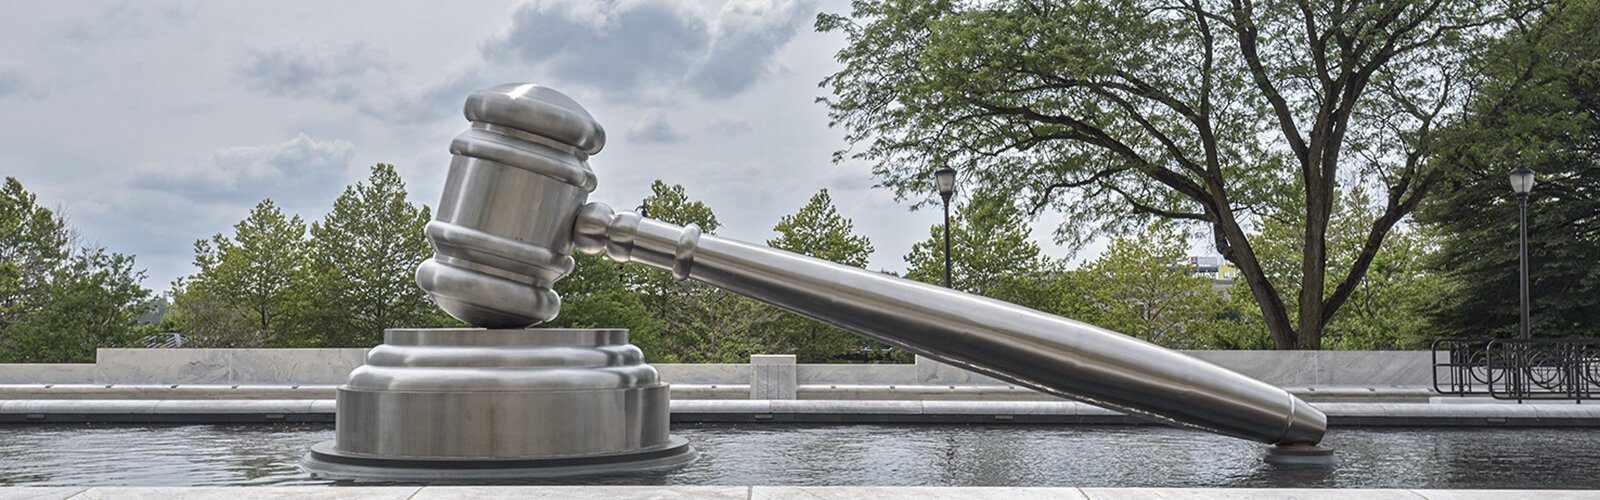 “Gavel” by African-American multimedia artist and sculptor, Andrew F. Scott, located in the south reflecting pool outside the Supreme Court of Ohio.